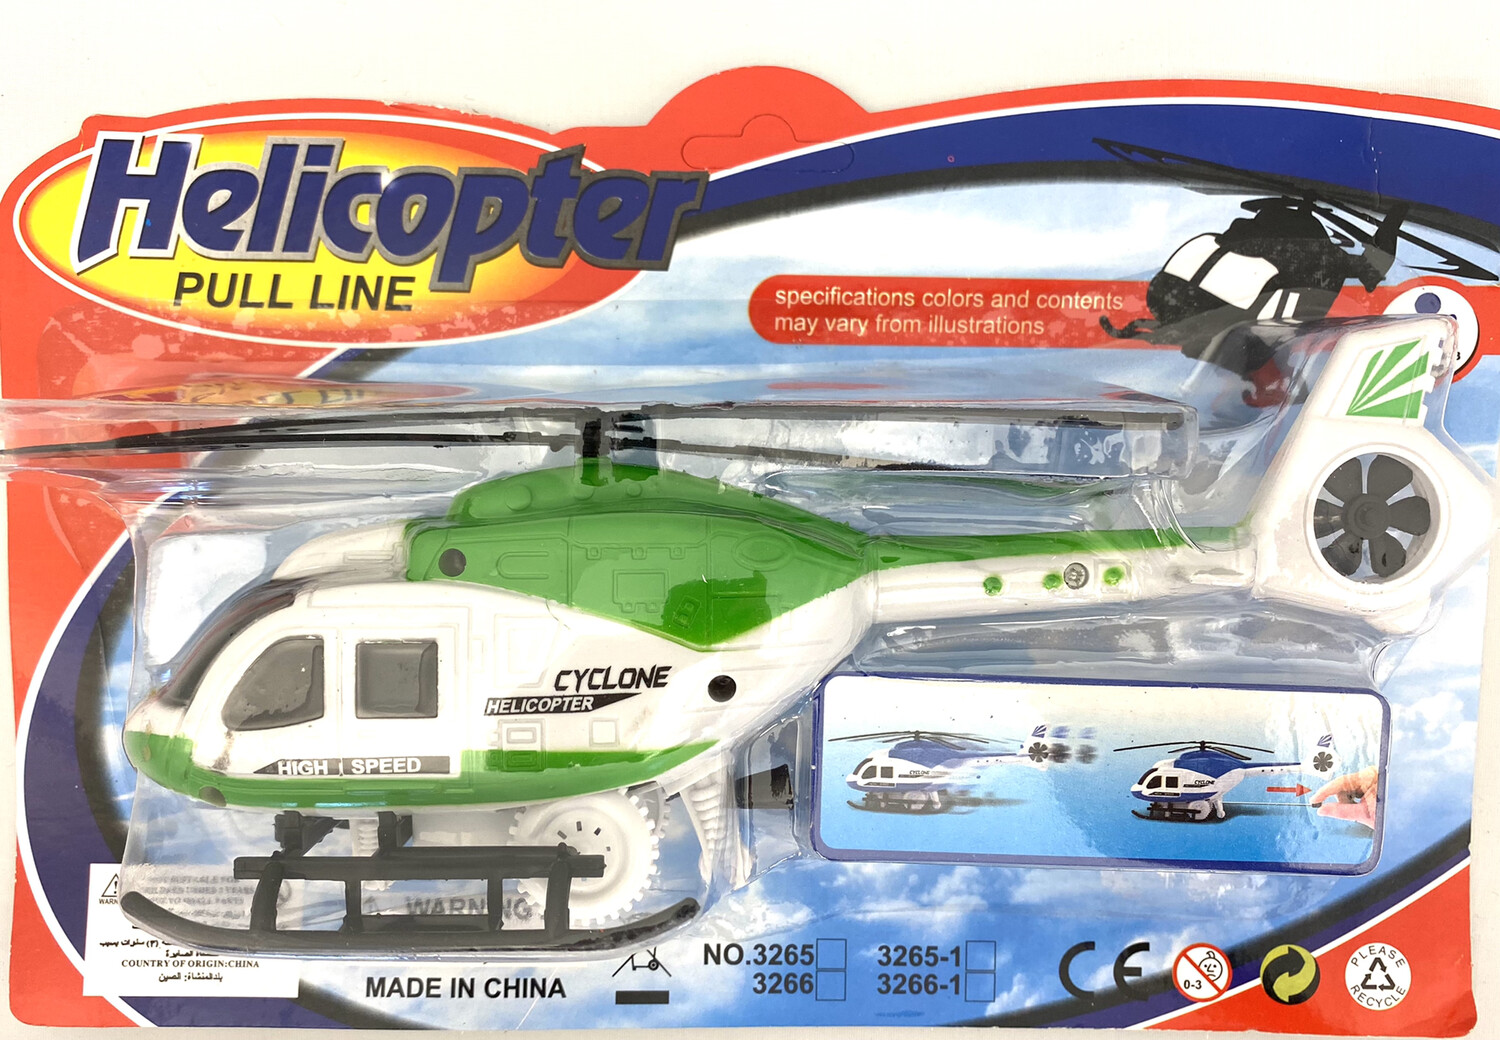 $4.99 NOVELTY MIX / PULL BACK PULLBACK HELICOPTER / 310 - HS-9018